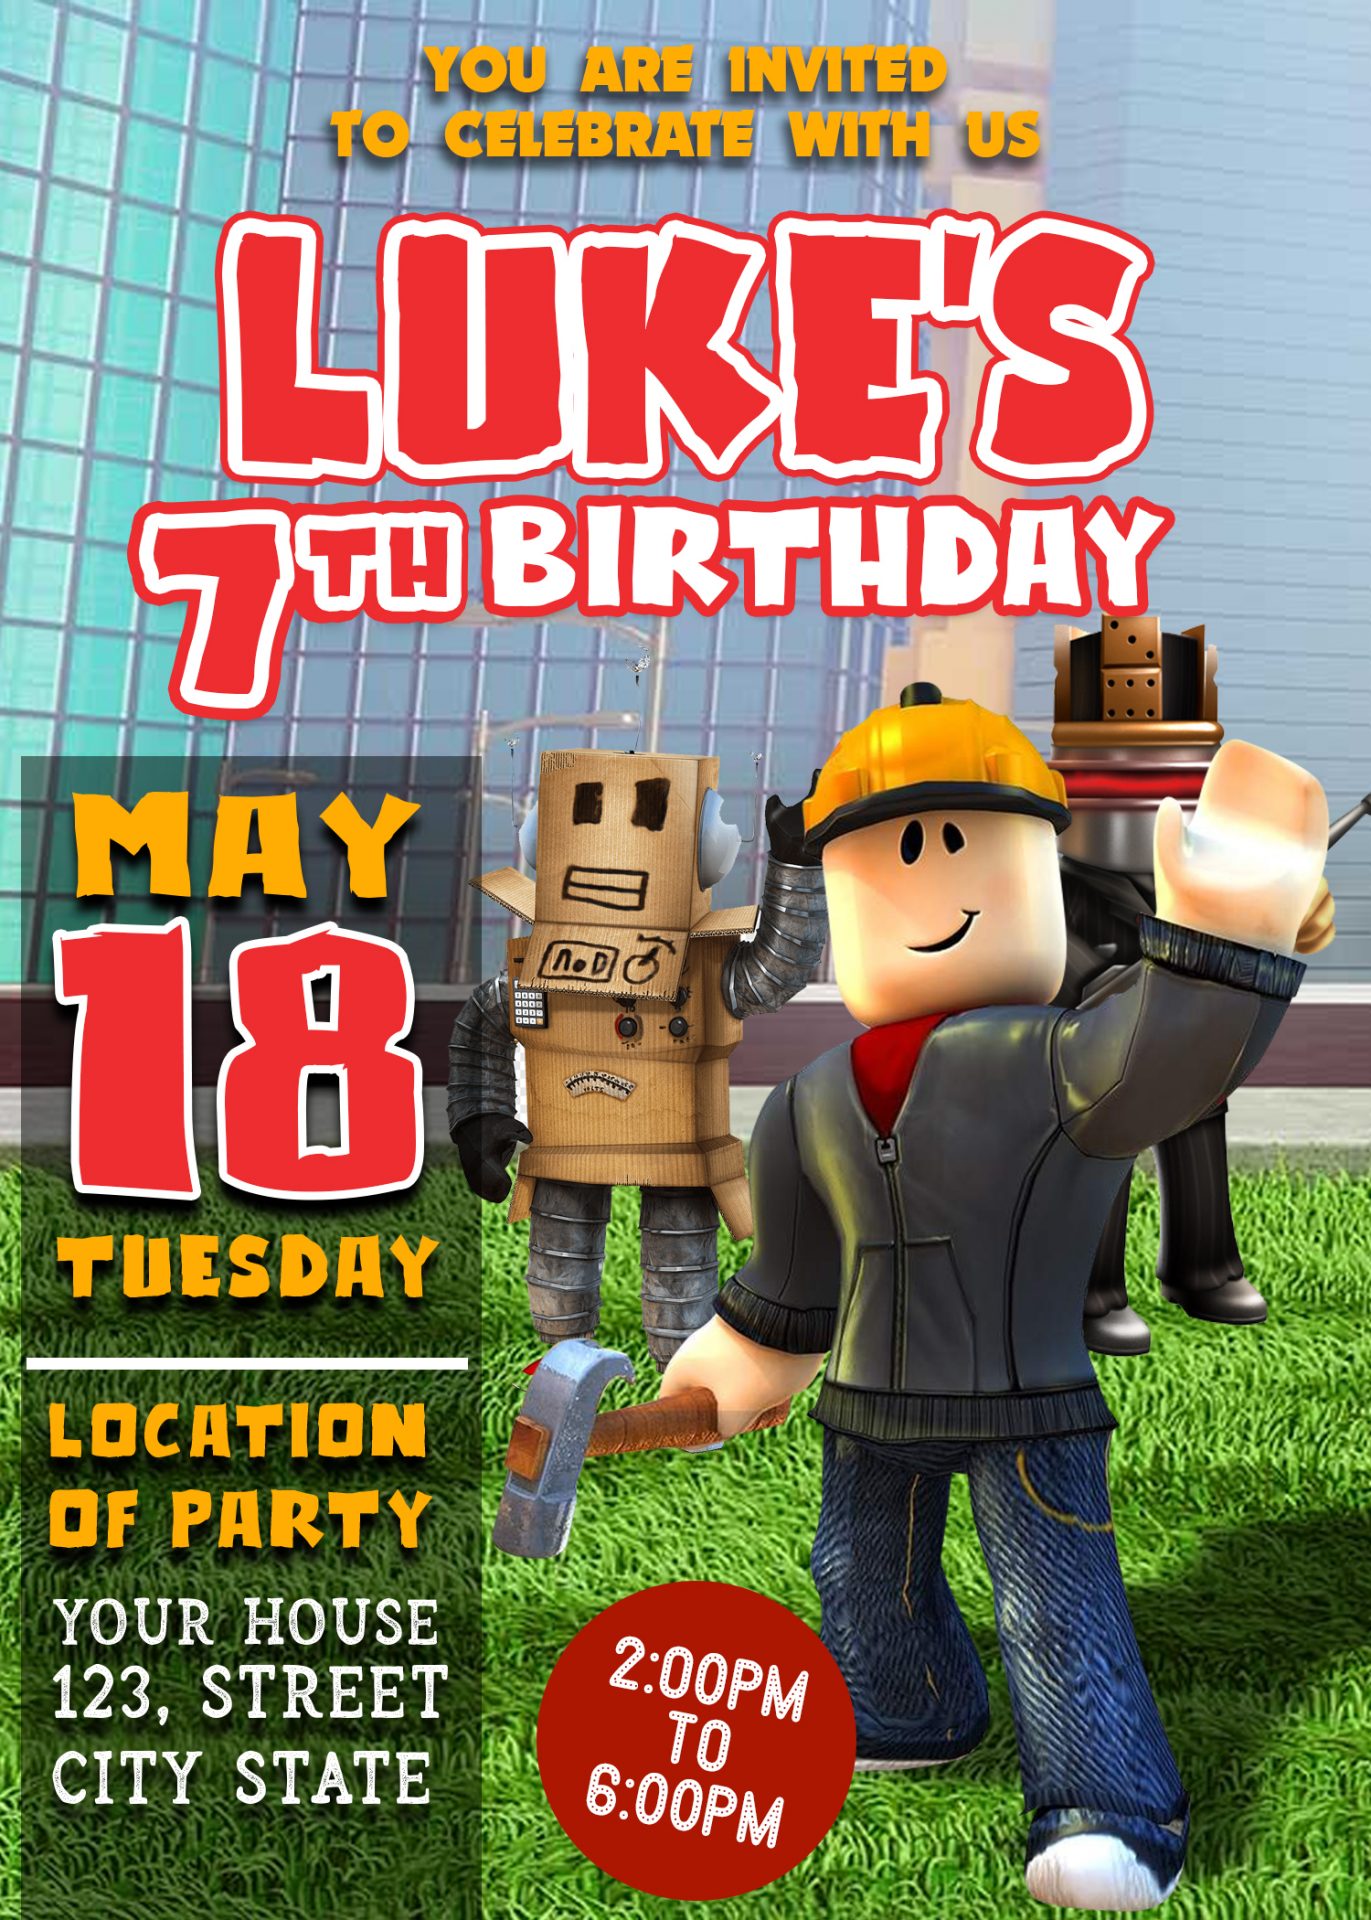 Roblox Online Game Birthday Invitation Jamakodesigns - house party roblox game